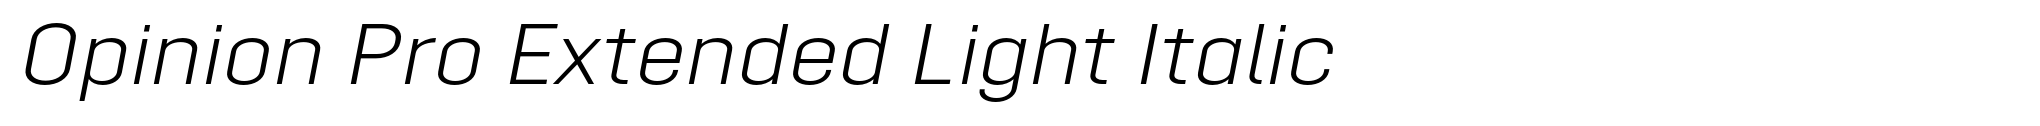 Opinion Pro Extended Light Italic image